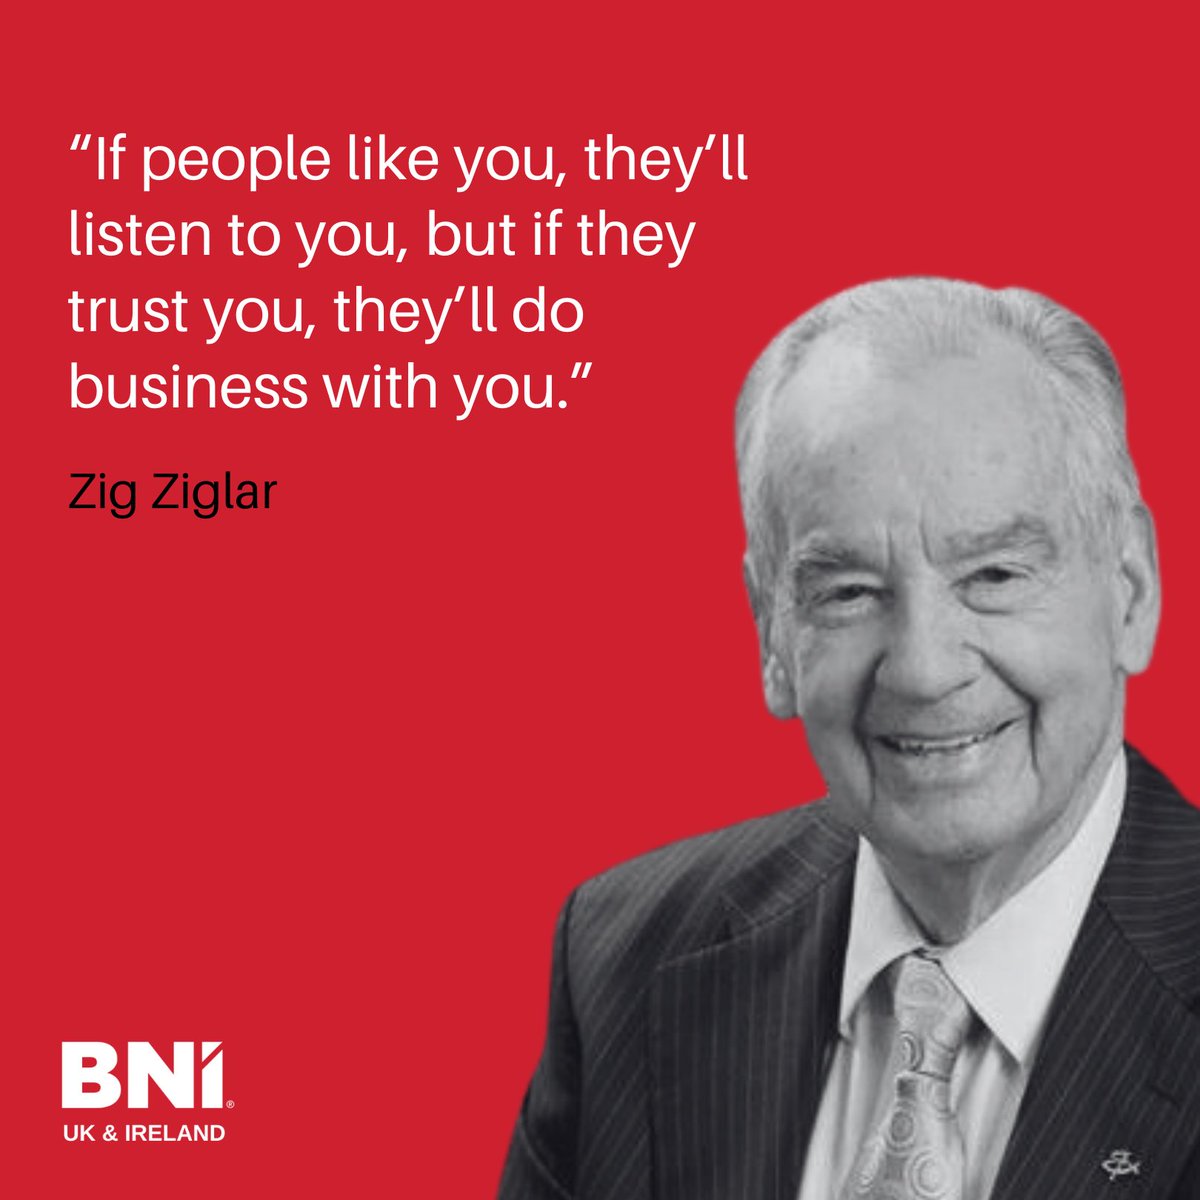 “If people like you, they’ll listen to you, but if they trust you, they’ll do business with you.” — Zig Ziglar